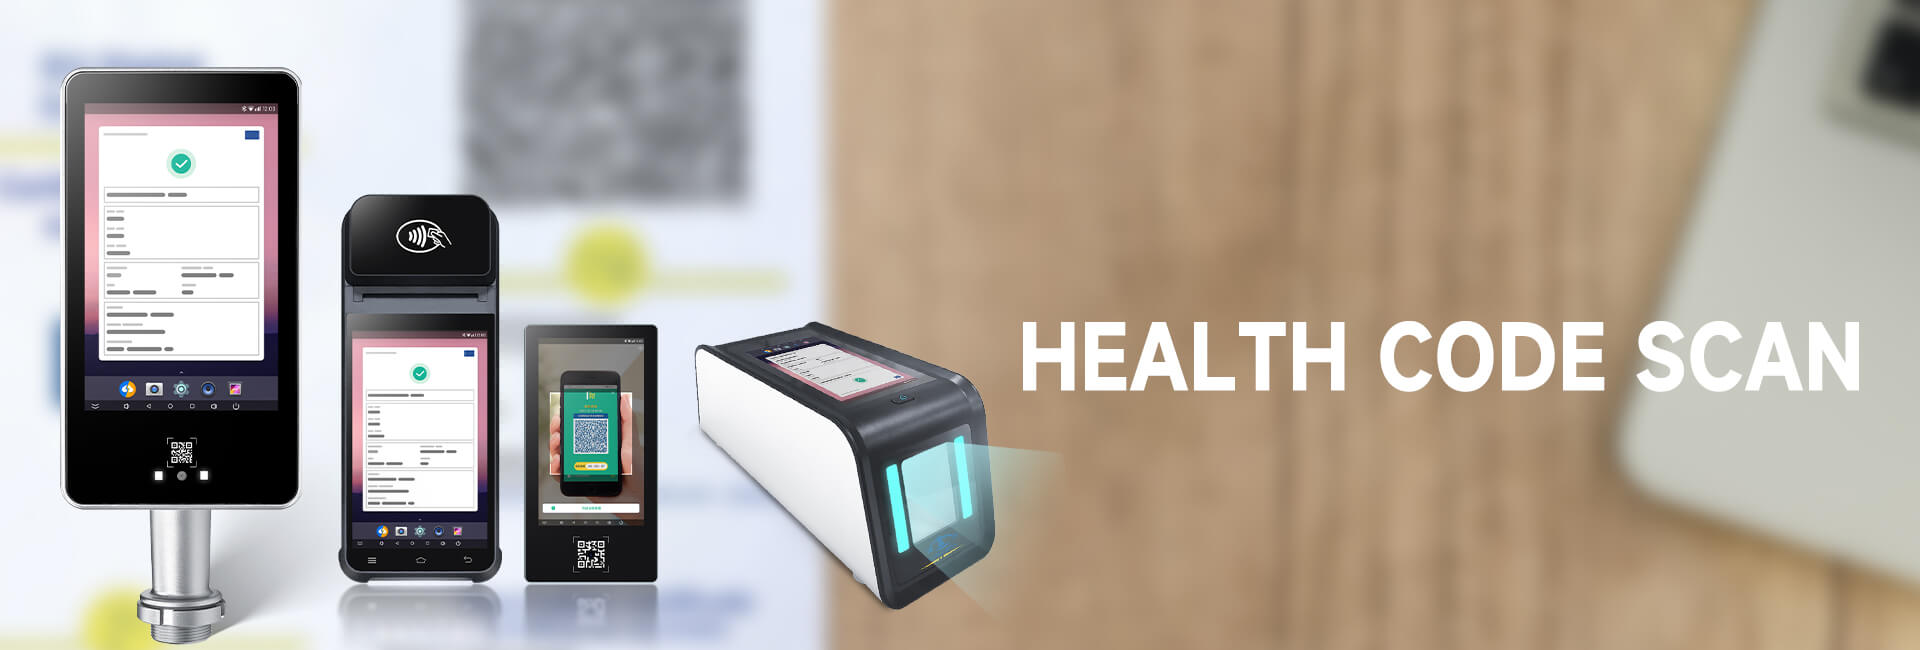 HFSecurity Health Code Scan